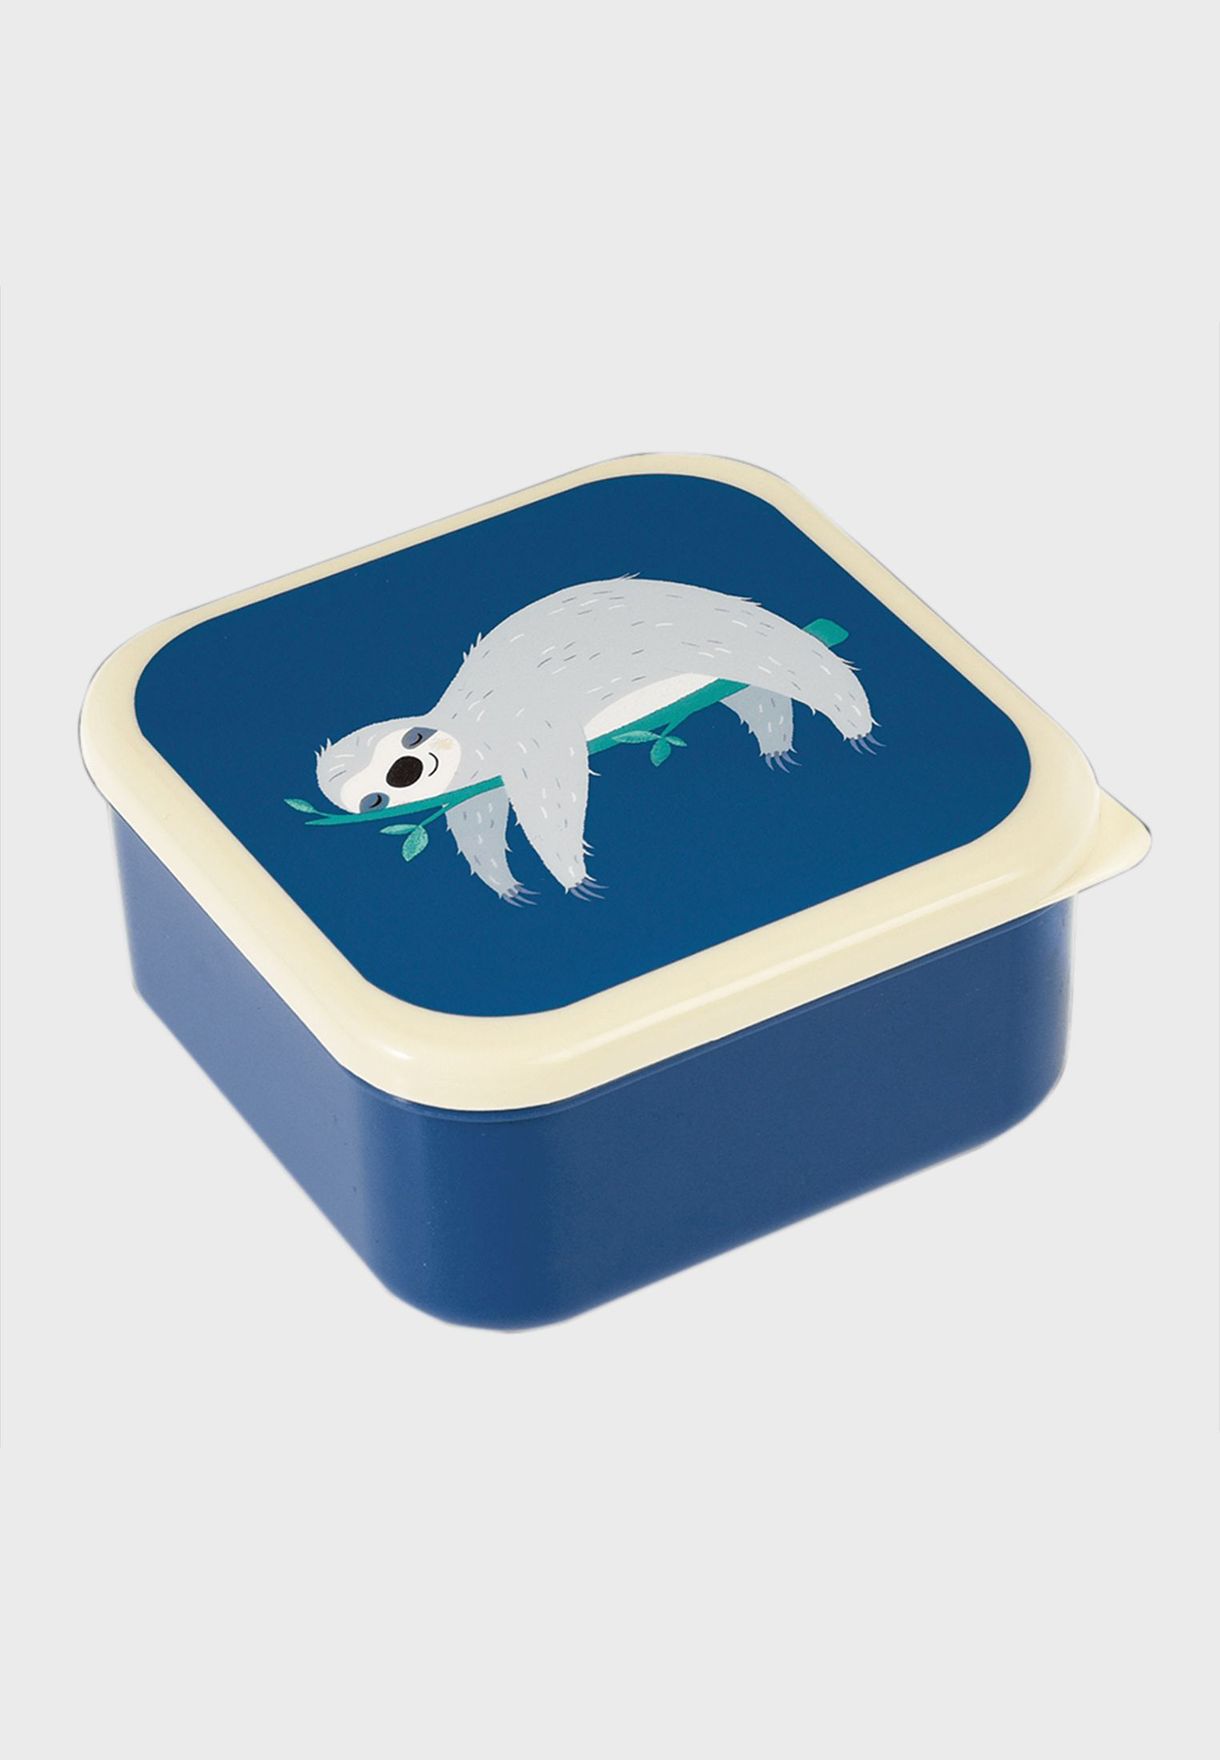 Set Of 3 Sydney The Sloth Snack Boxes